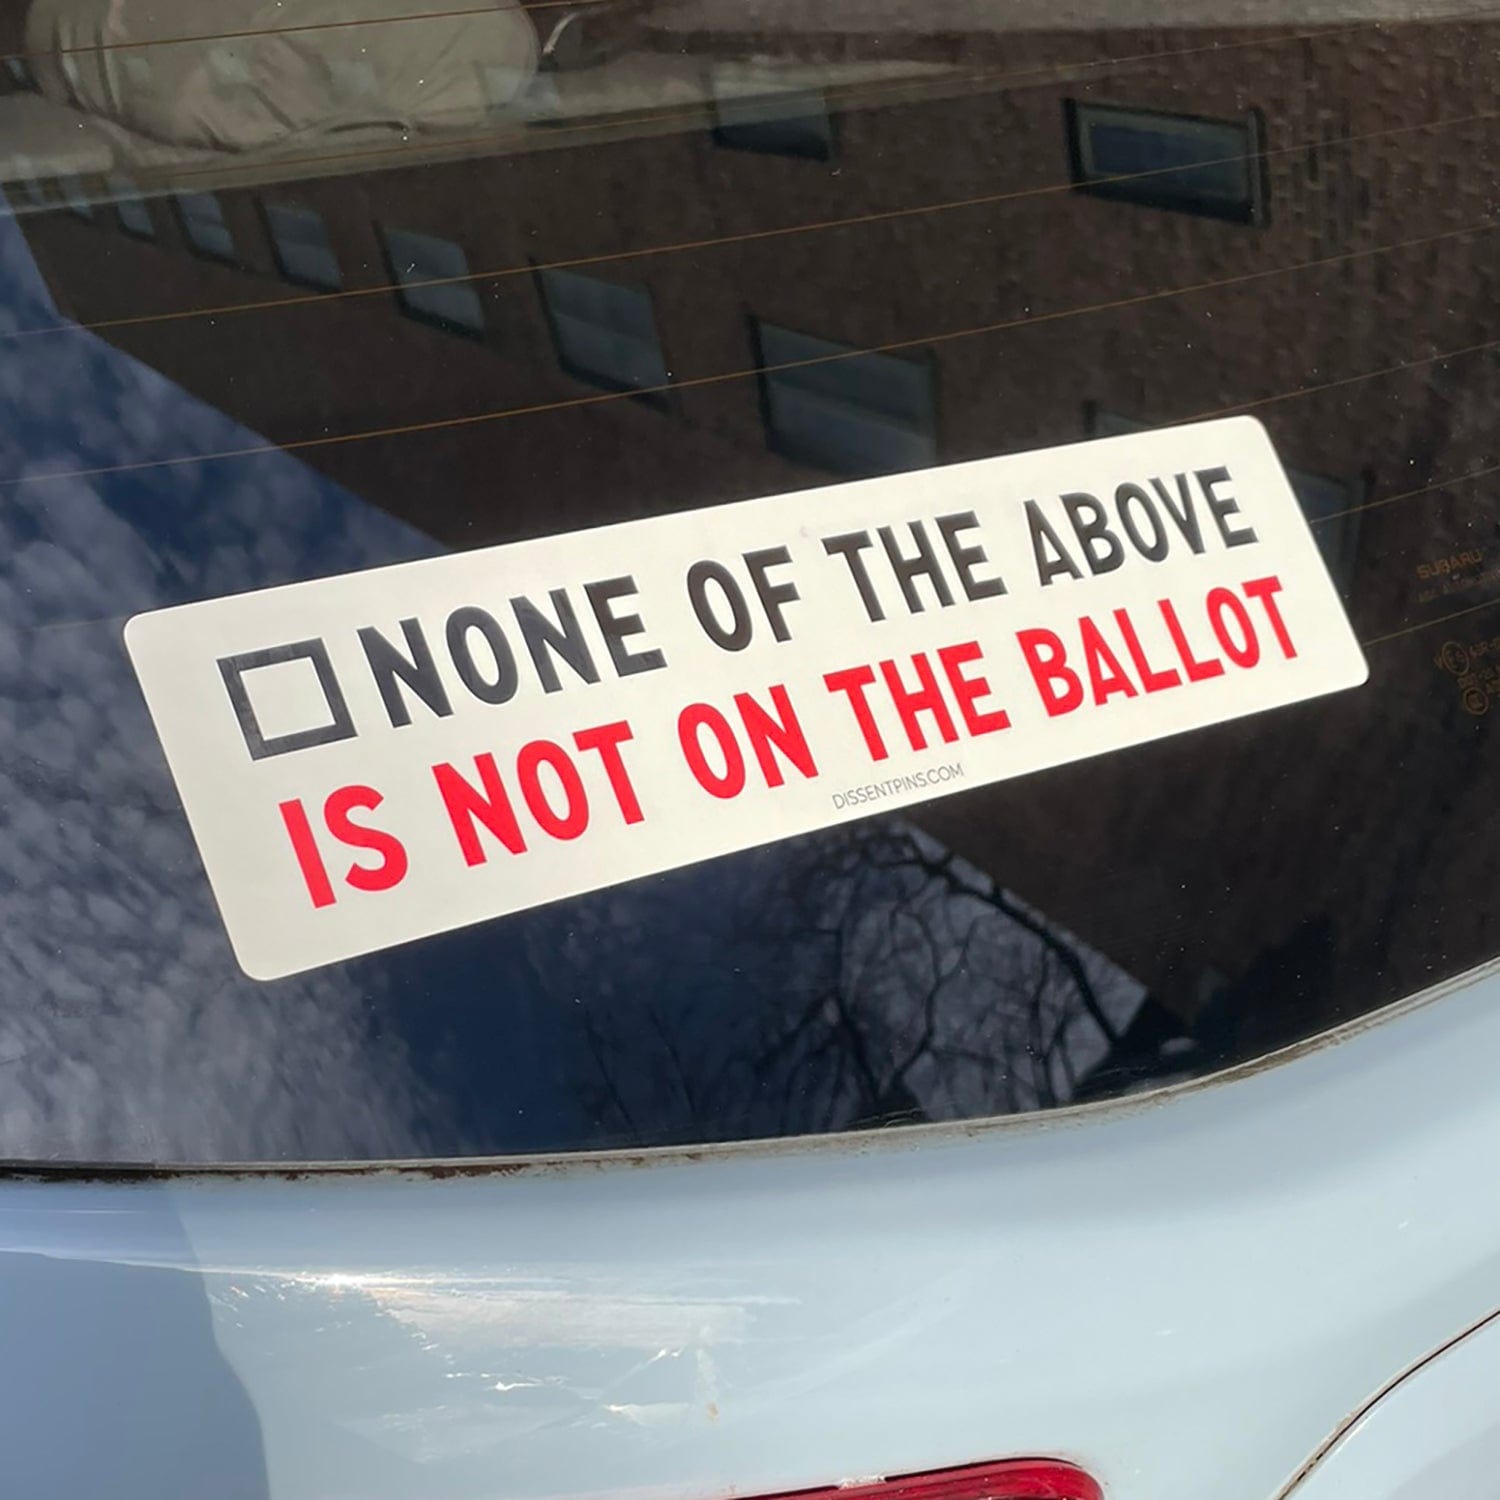 None of the Above is Not on the Ballot - Bumper Sticker